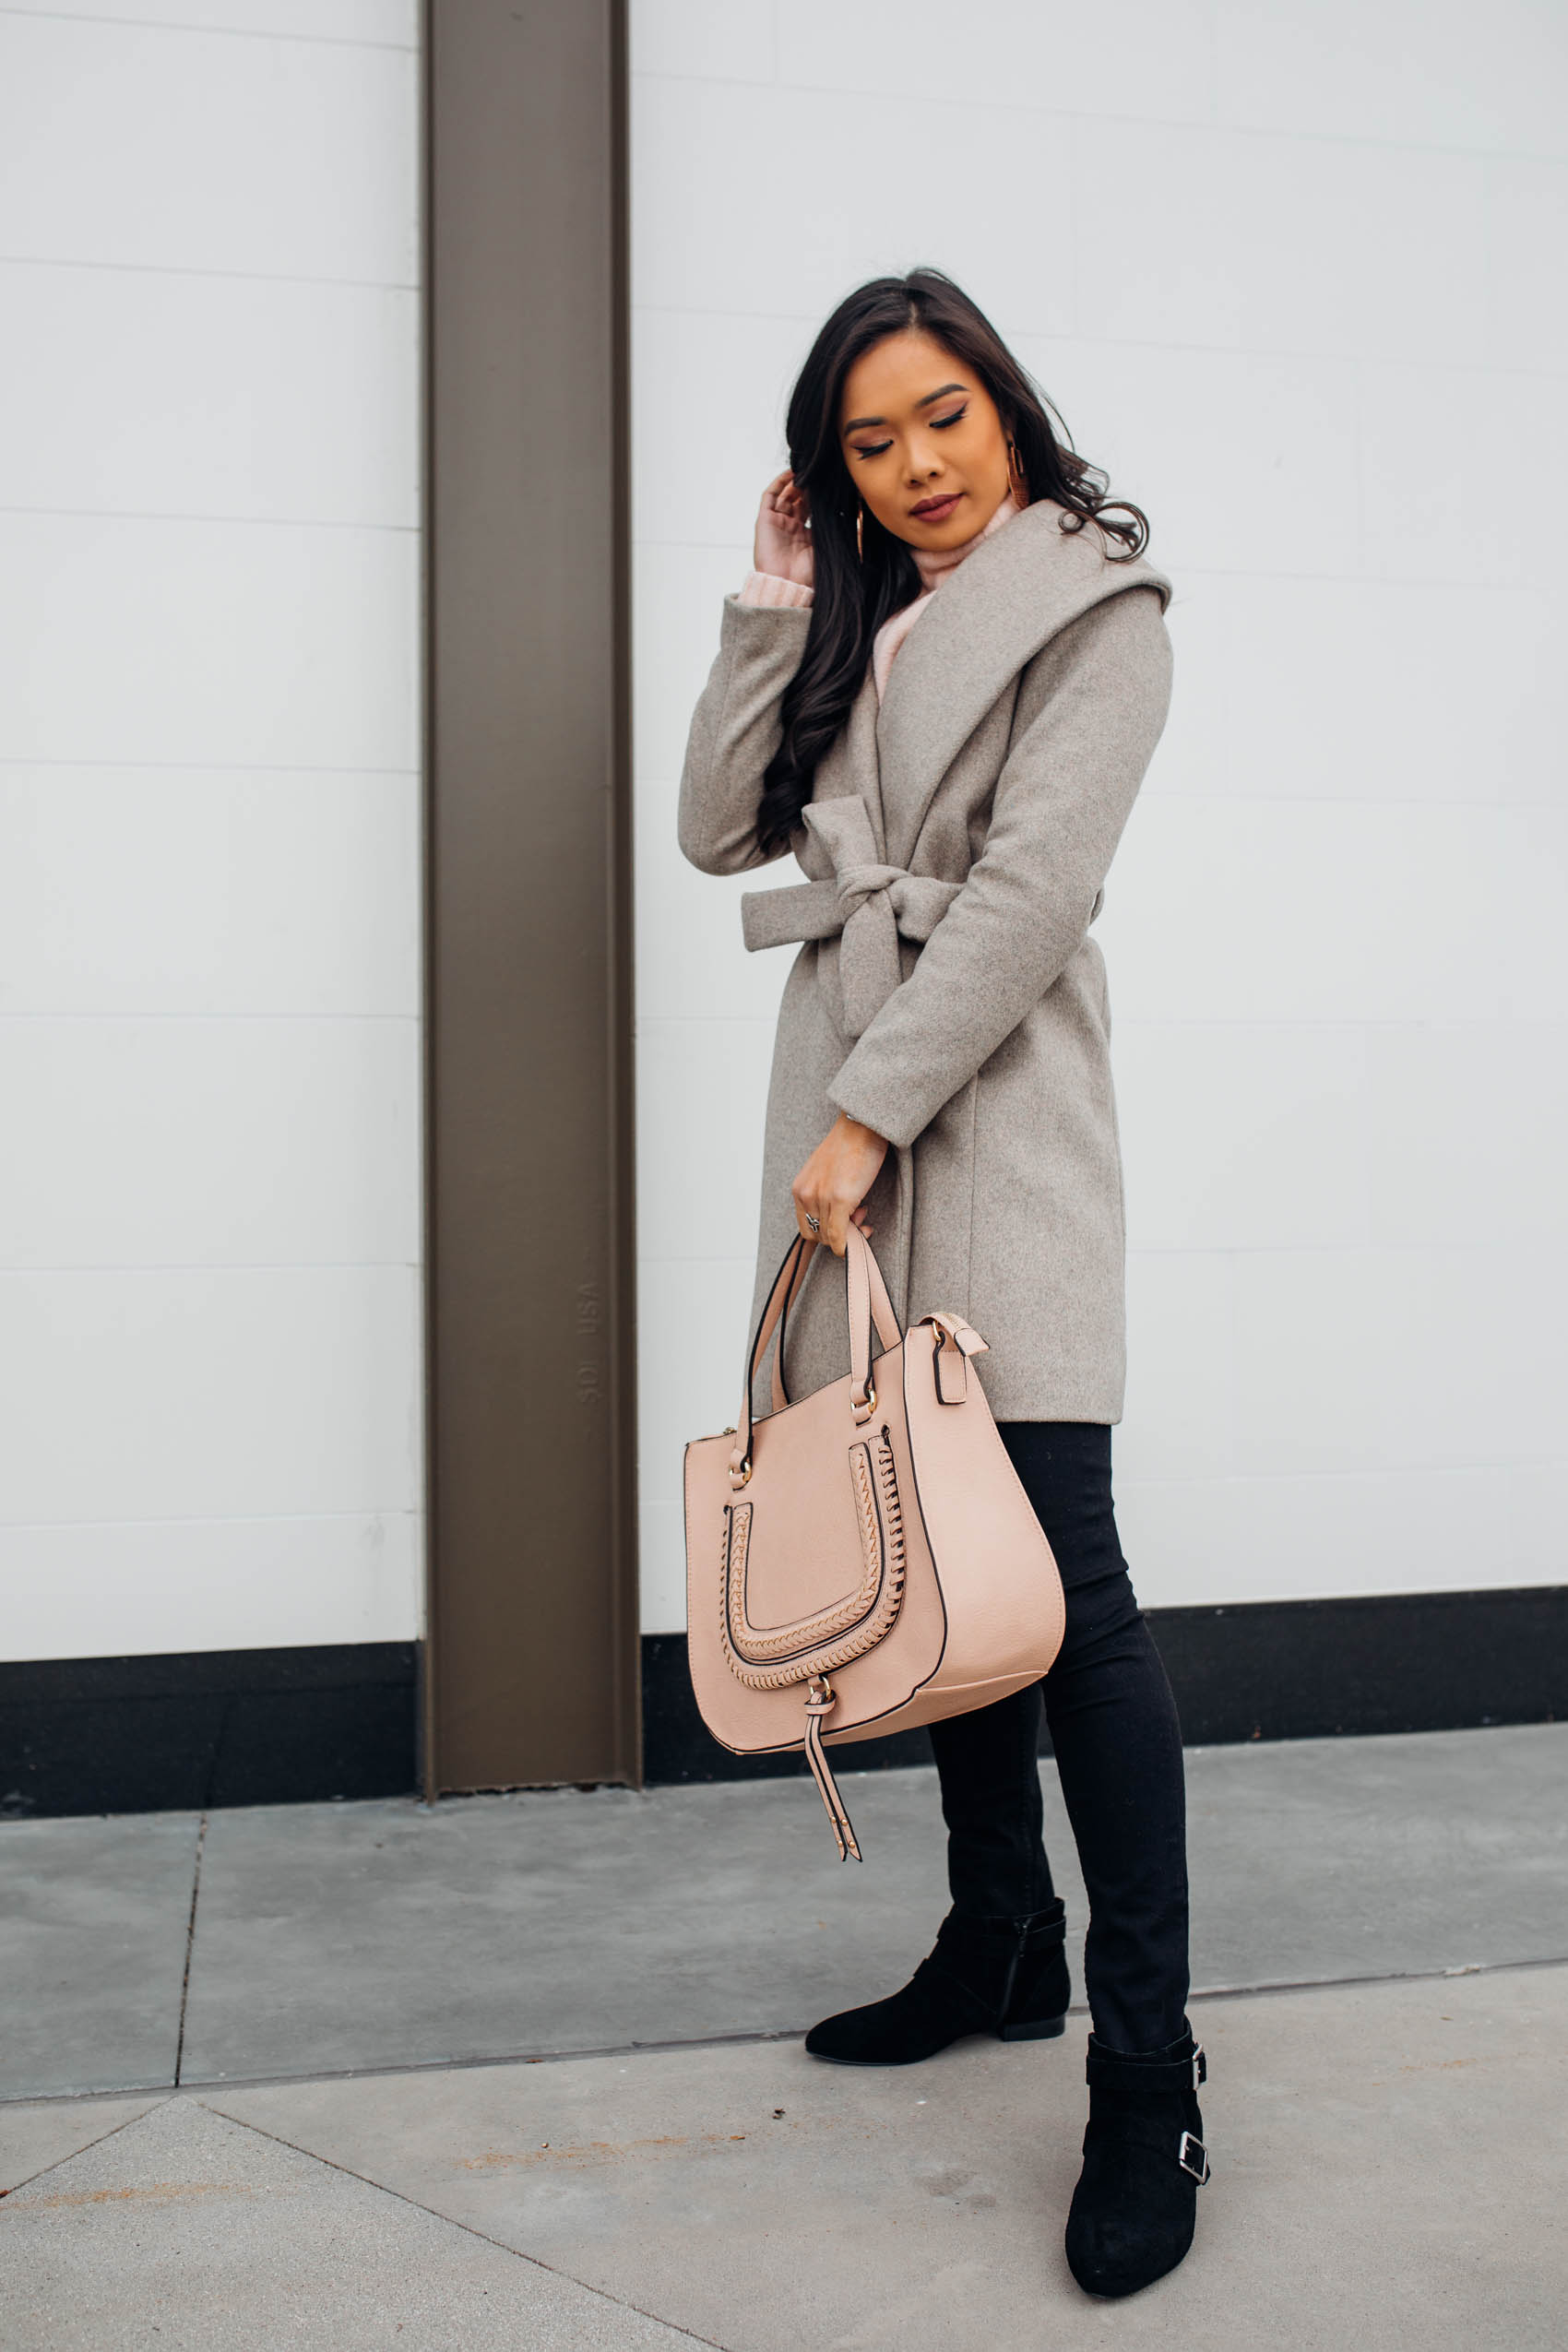 Blogger Hoang-Kim shares a winter outfit idea with a wool wrap coat and Destin satchel by Sole Society